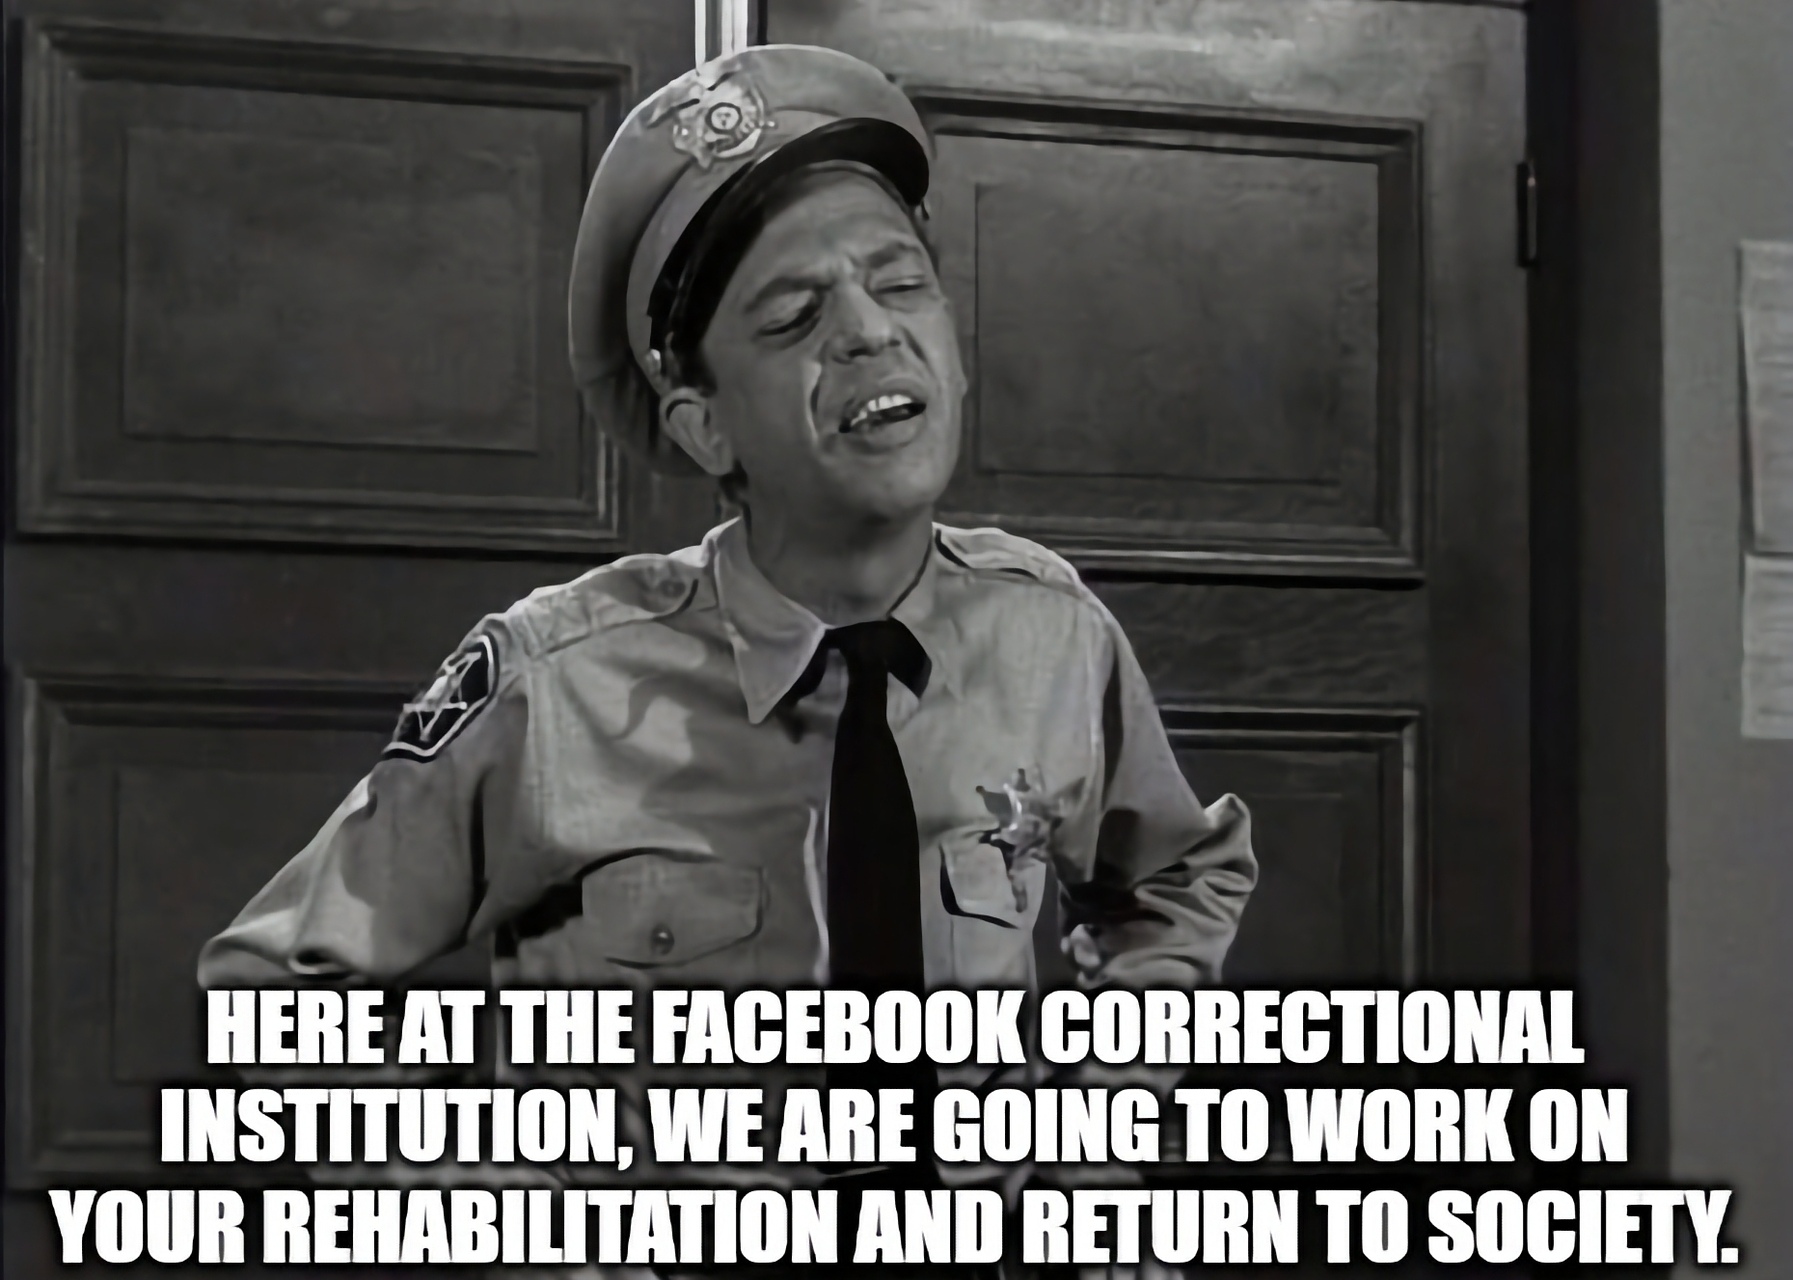 Facebook: a "meme" (i.e. a satirical cartoon on the Internet) inspired by Facebook's moderation policies, judged highly questionable (Image: imgflip.com)